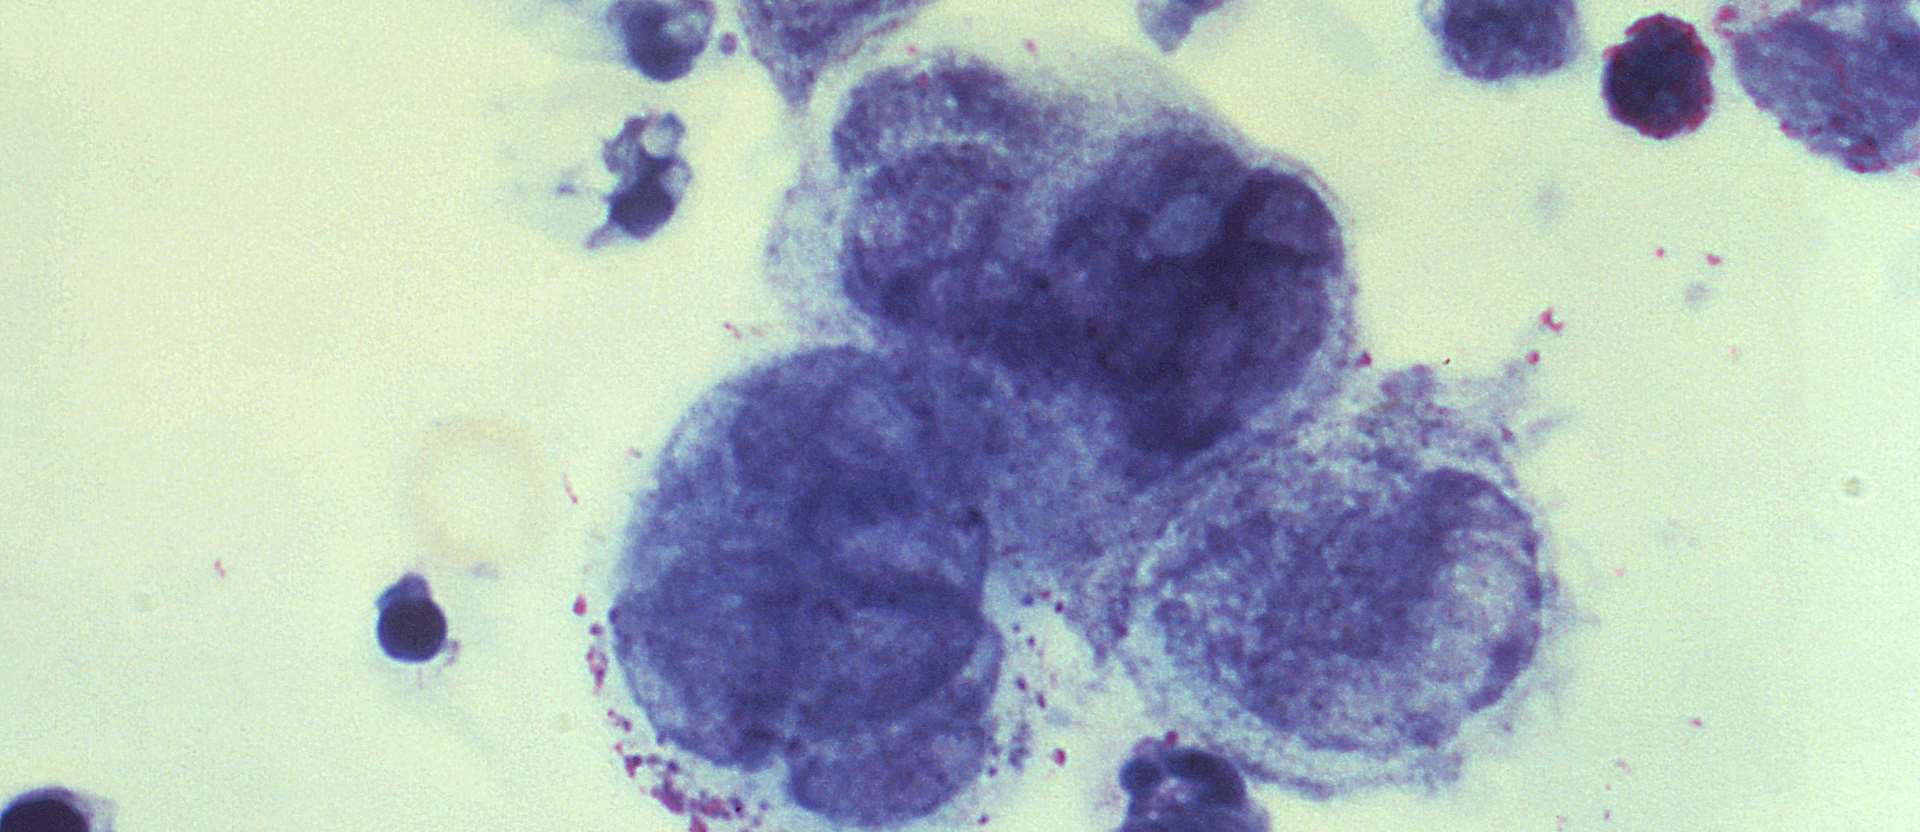 Herpes multinucleated giant cells